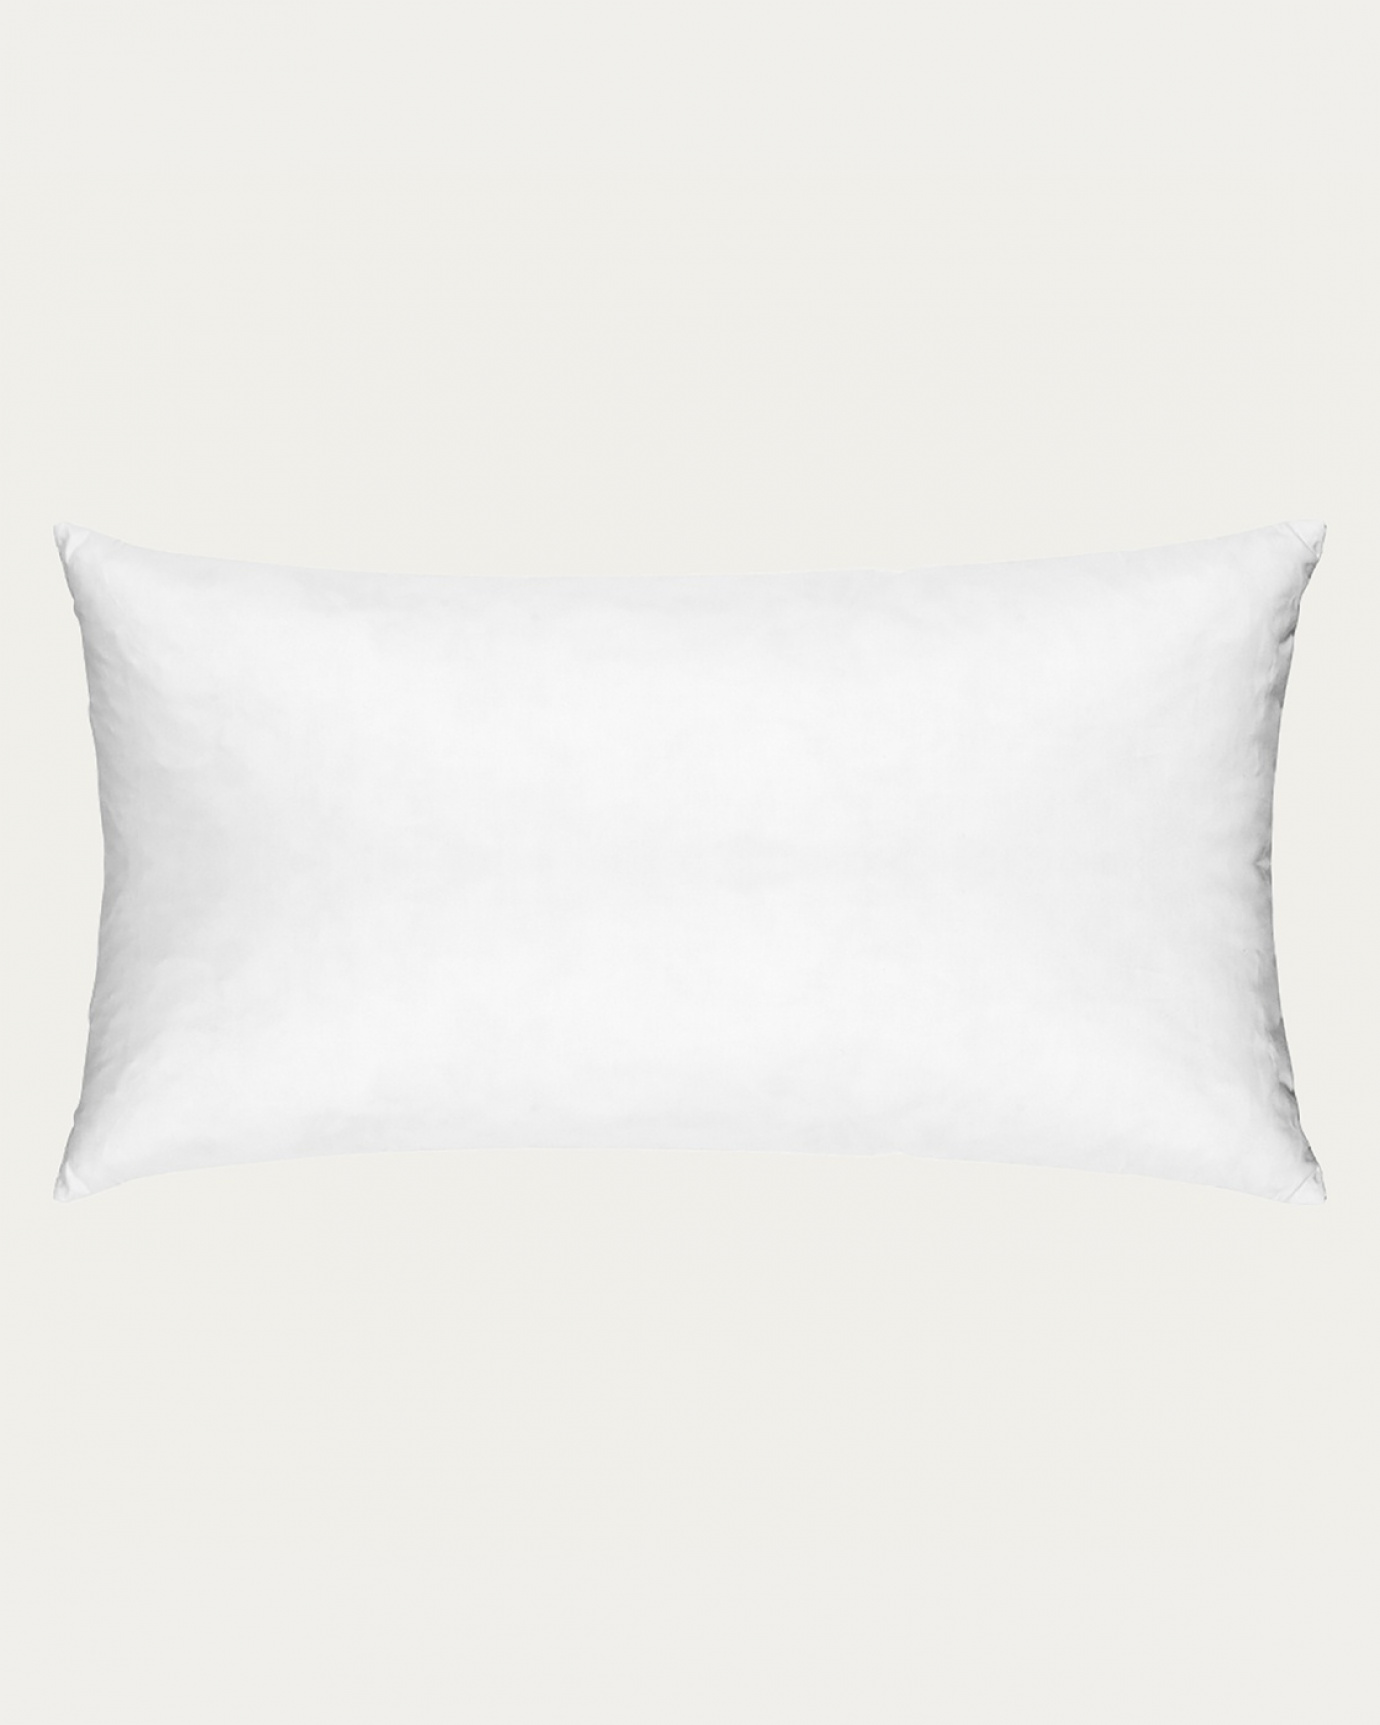 Product image white SYNTHETIC cushion insert made of cotton with polyester filling from LINUM DESIGN. Size 50x90 cm.